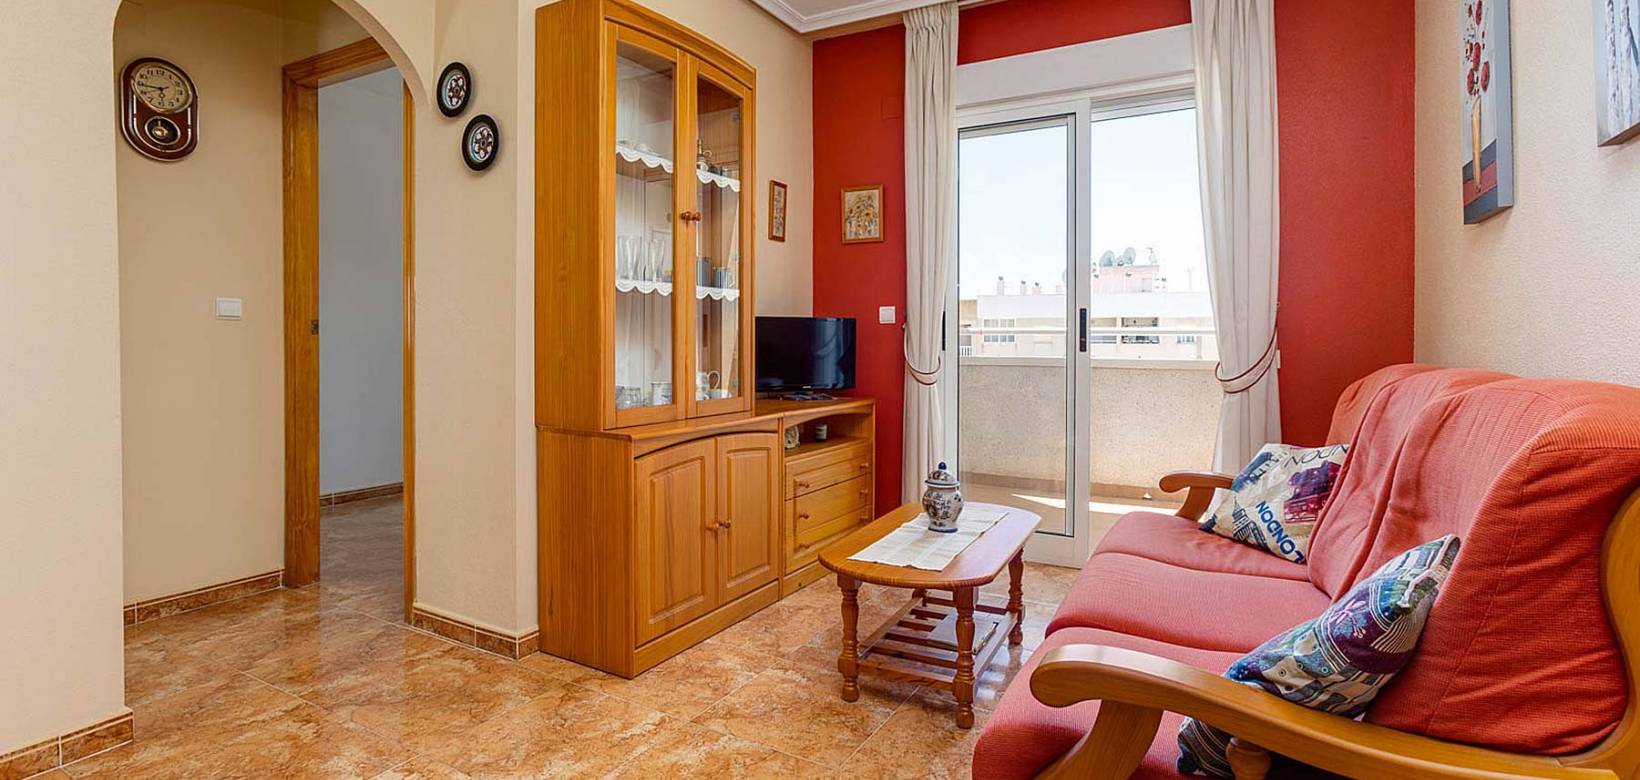 2nd hand - Penthouse - Torrevieja